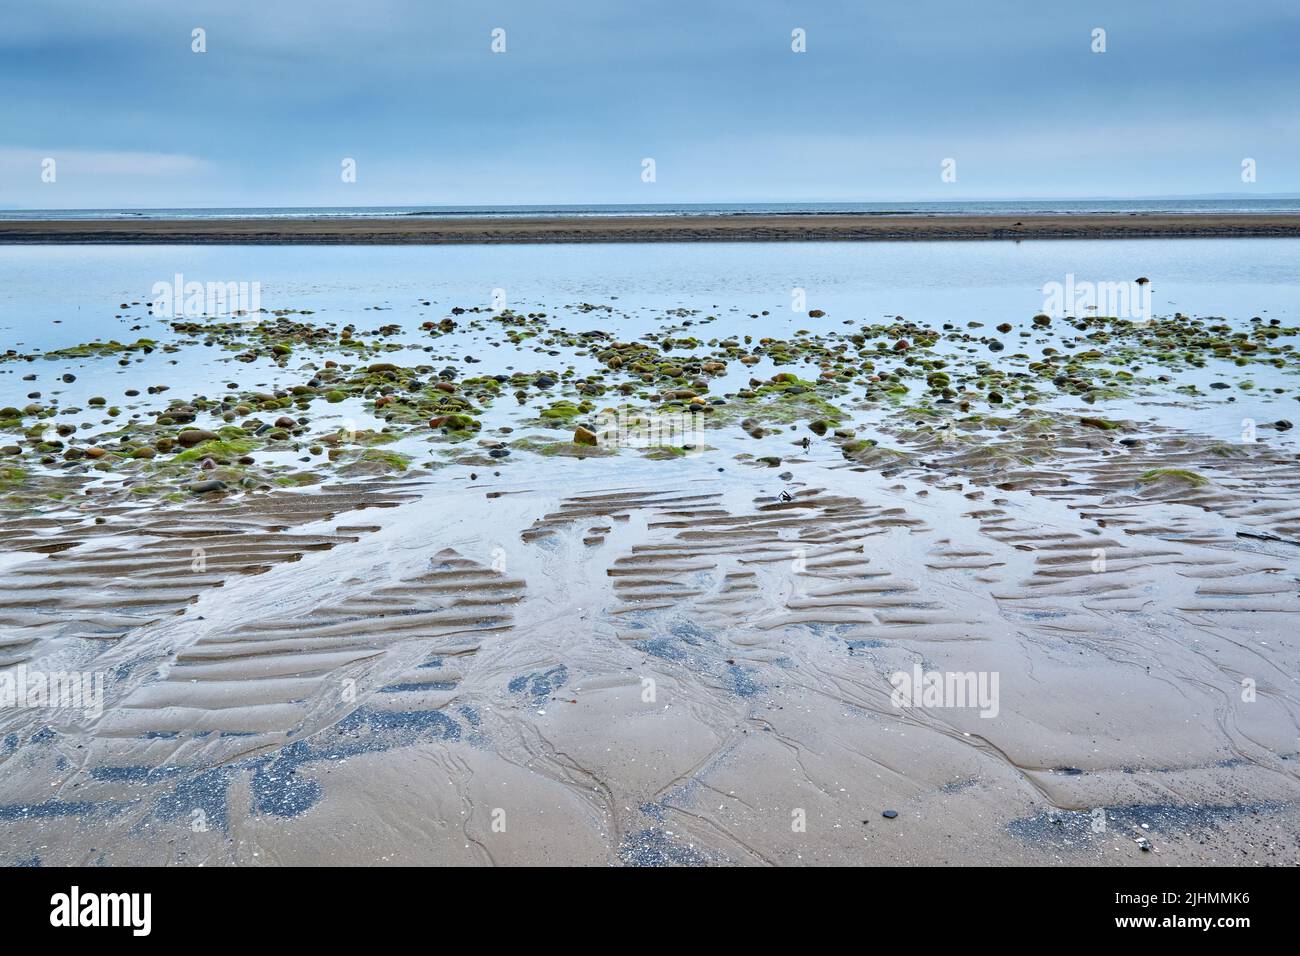 Interesting patterns in the sand at low tide at Big Glace Bay Beach Cape Breton. Stock Photo